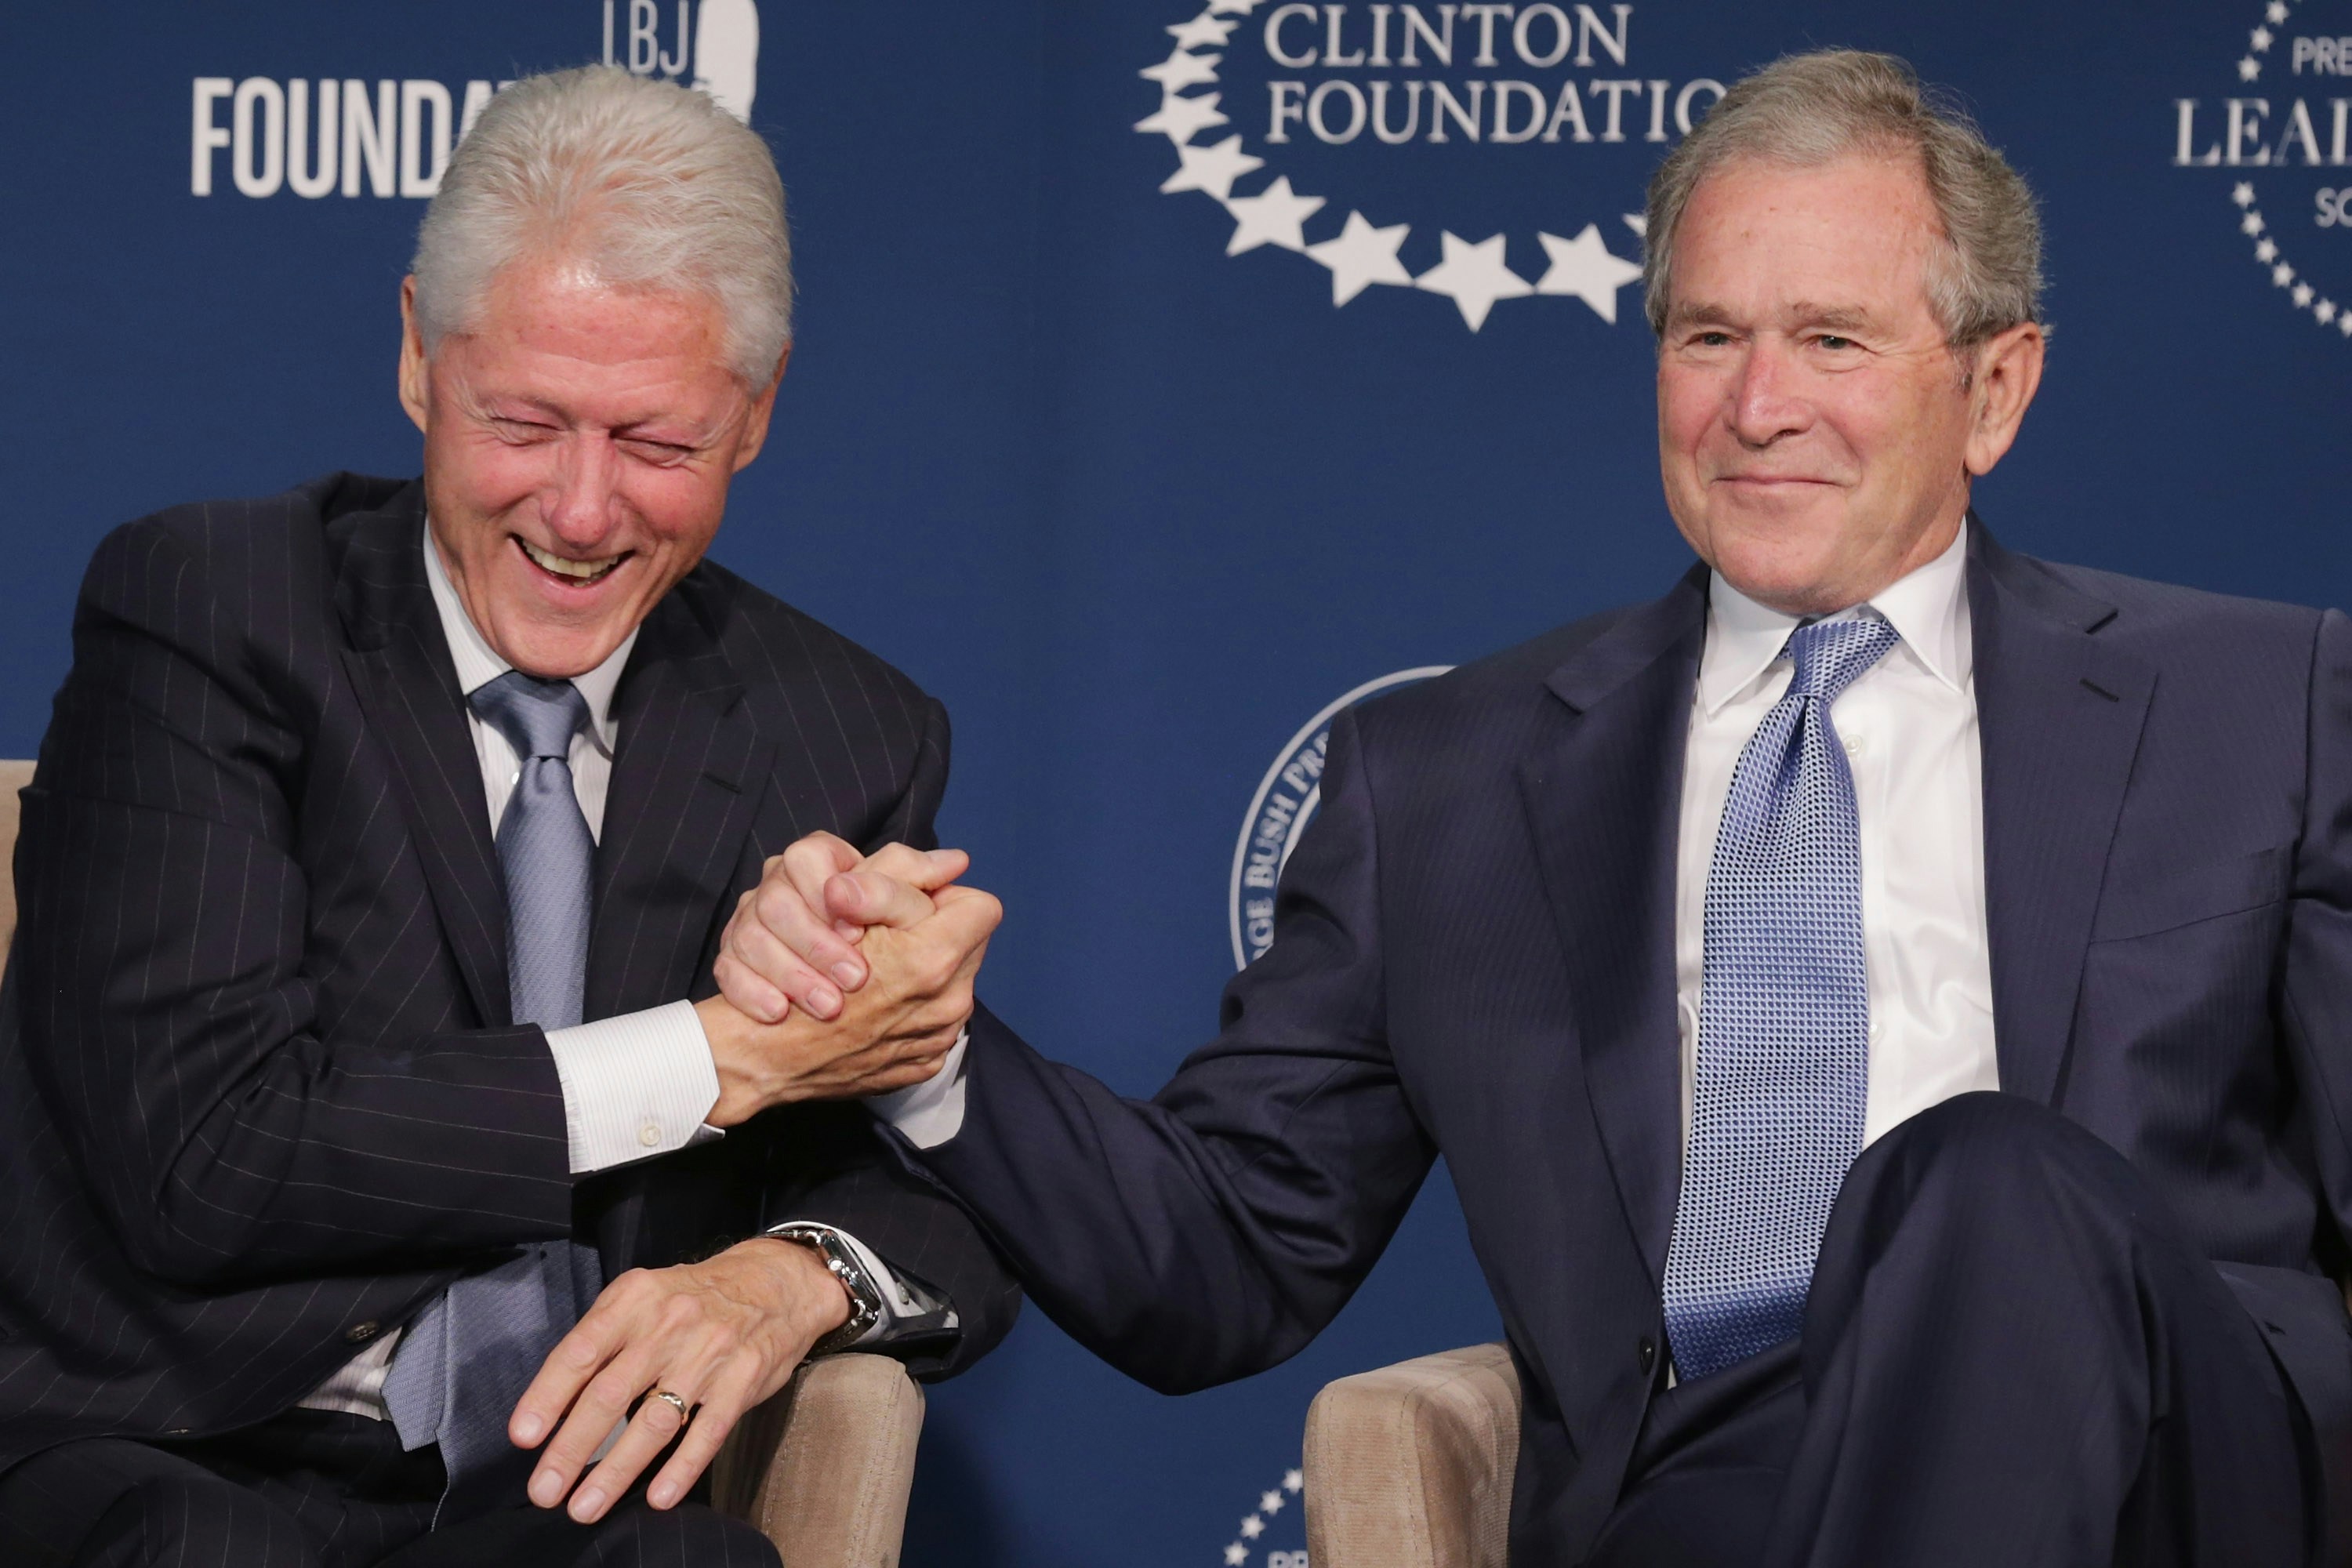 WASHINGTON, DC - SEPTEMBER 08:  Former U.S. presidents Bill Clinton (L) and George W. Bush talk about their hopes for the Presidential Leadership Scholars program at the Newseum September 8, 2014 in Washington, DC.With the cooperation of the Clinton, Bush, Lyndon B. Johnson and George H. W. Bush presidential libraries and foundations, the new scholarship program will provide 'motivated leaders across all sectors an opportunity to study presidential leadership and decision making and learn from key administration officials, practitioners and leading academics.'  (Photo by Chip Somodevilla/Getty Images)